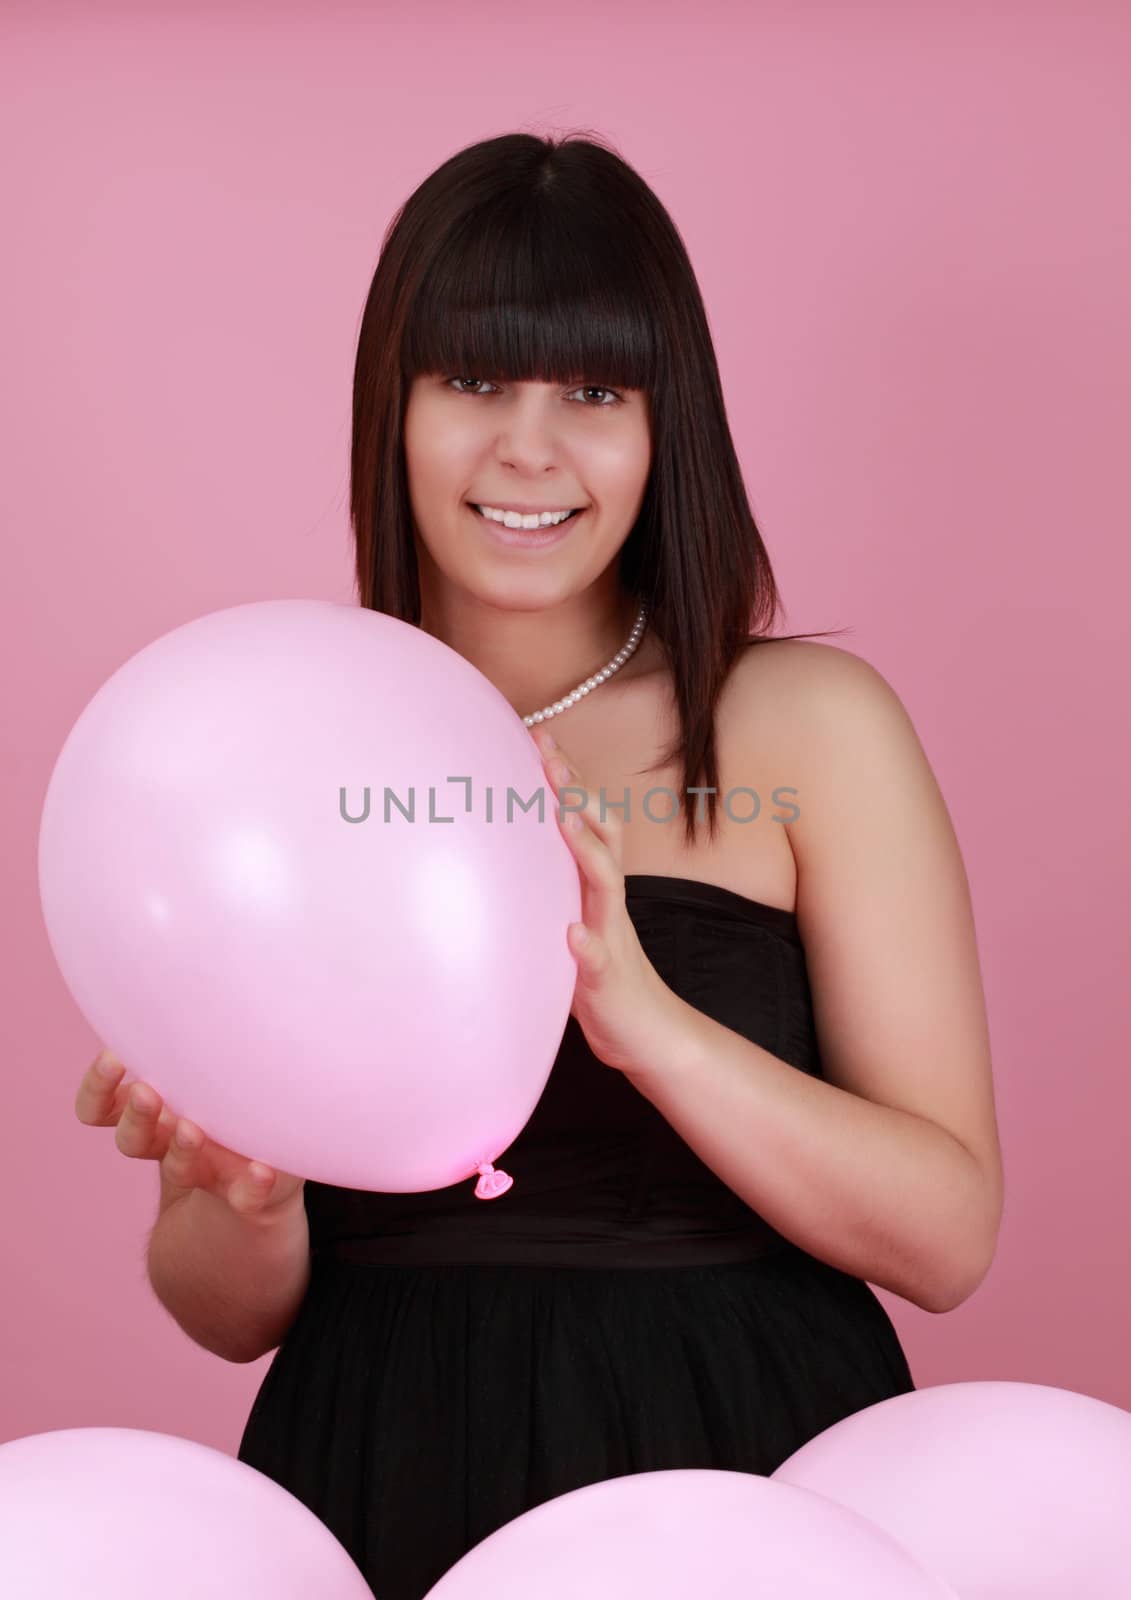 girl holding a pink balloon by lanalanglois